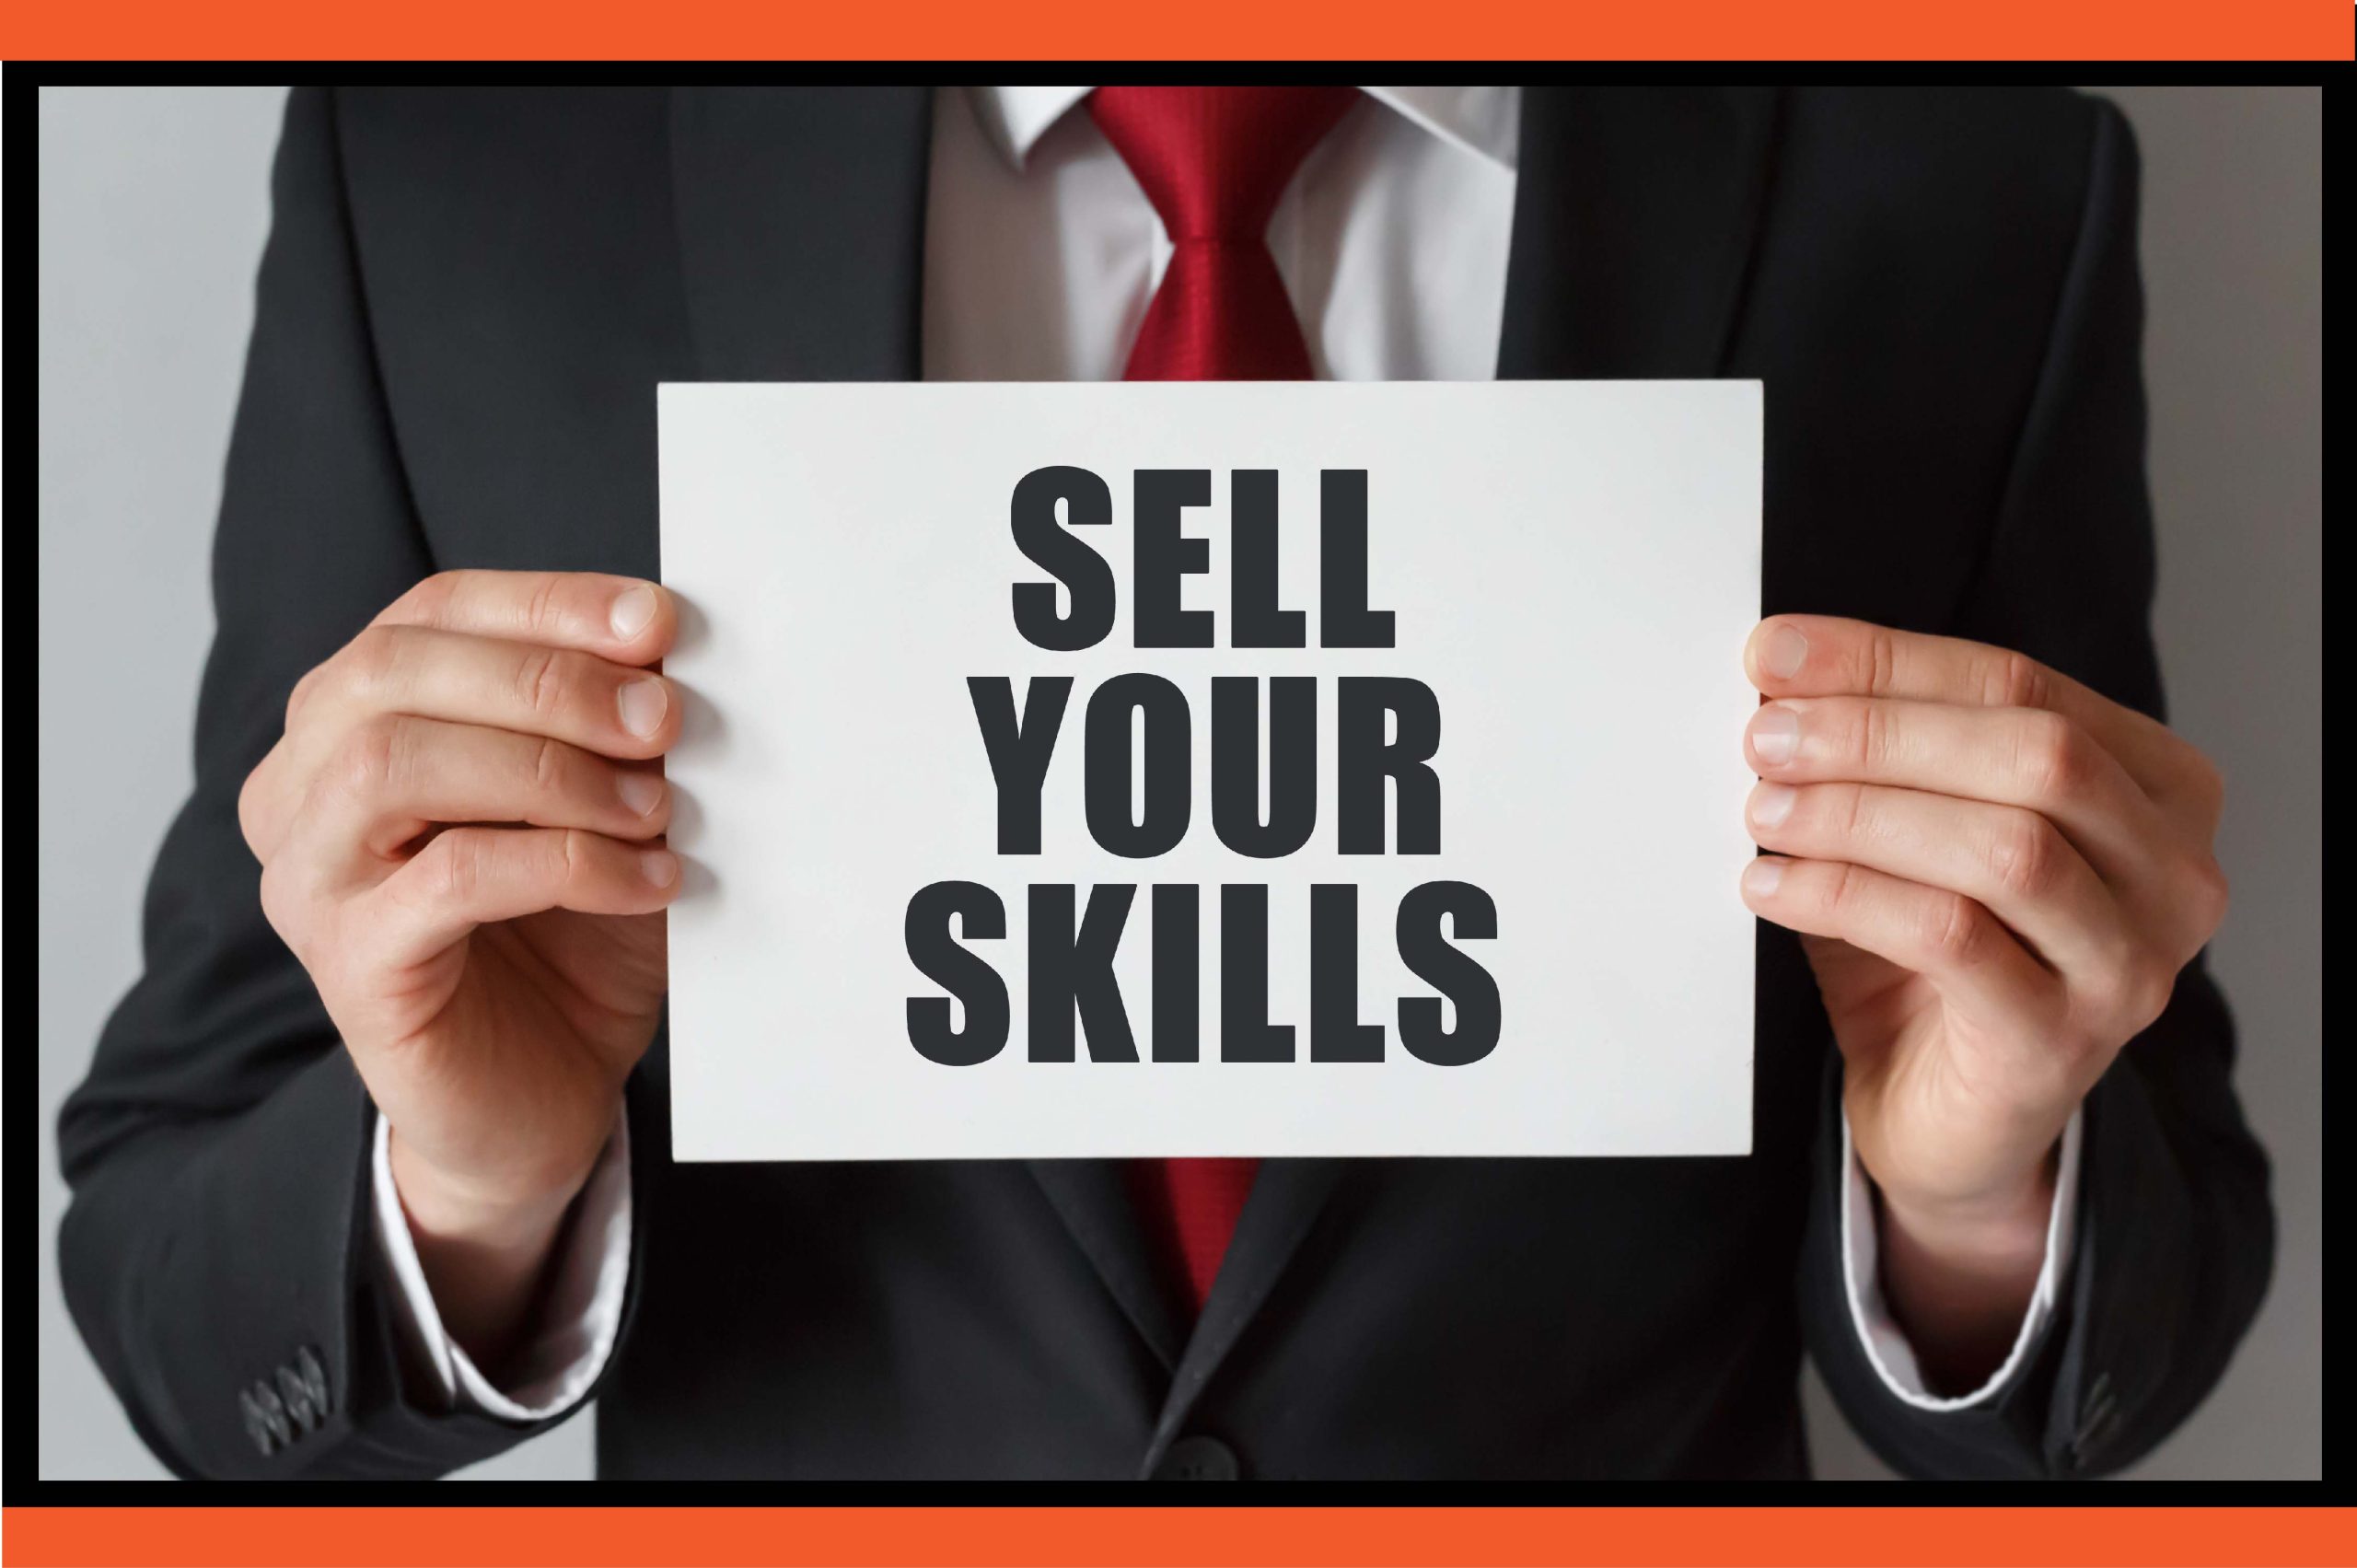 A headless picture of a guy in a dark suit with a white shirt and red tie holding an A4 white paper written SELL YOUR SKILLS